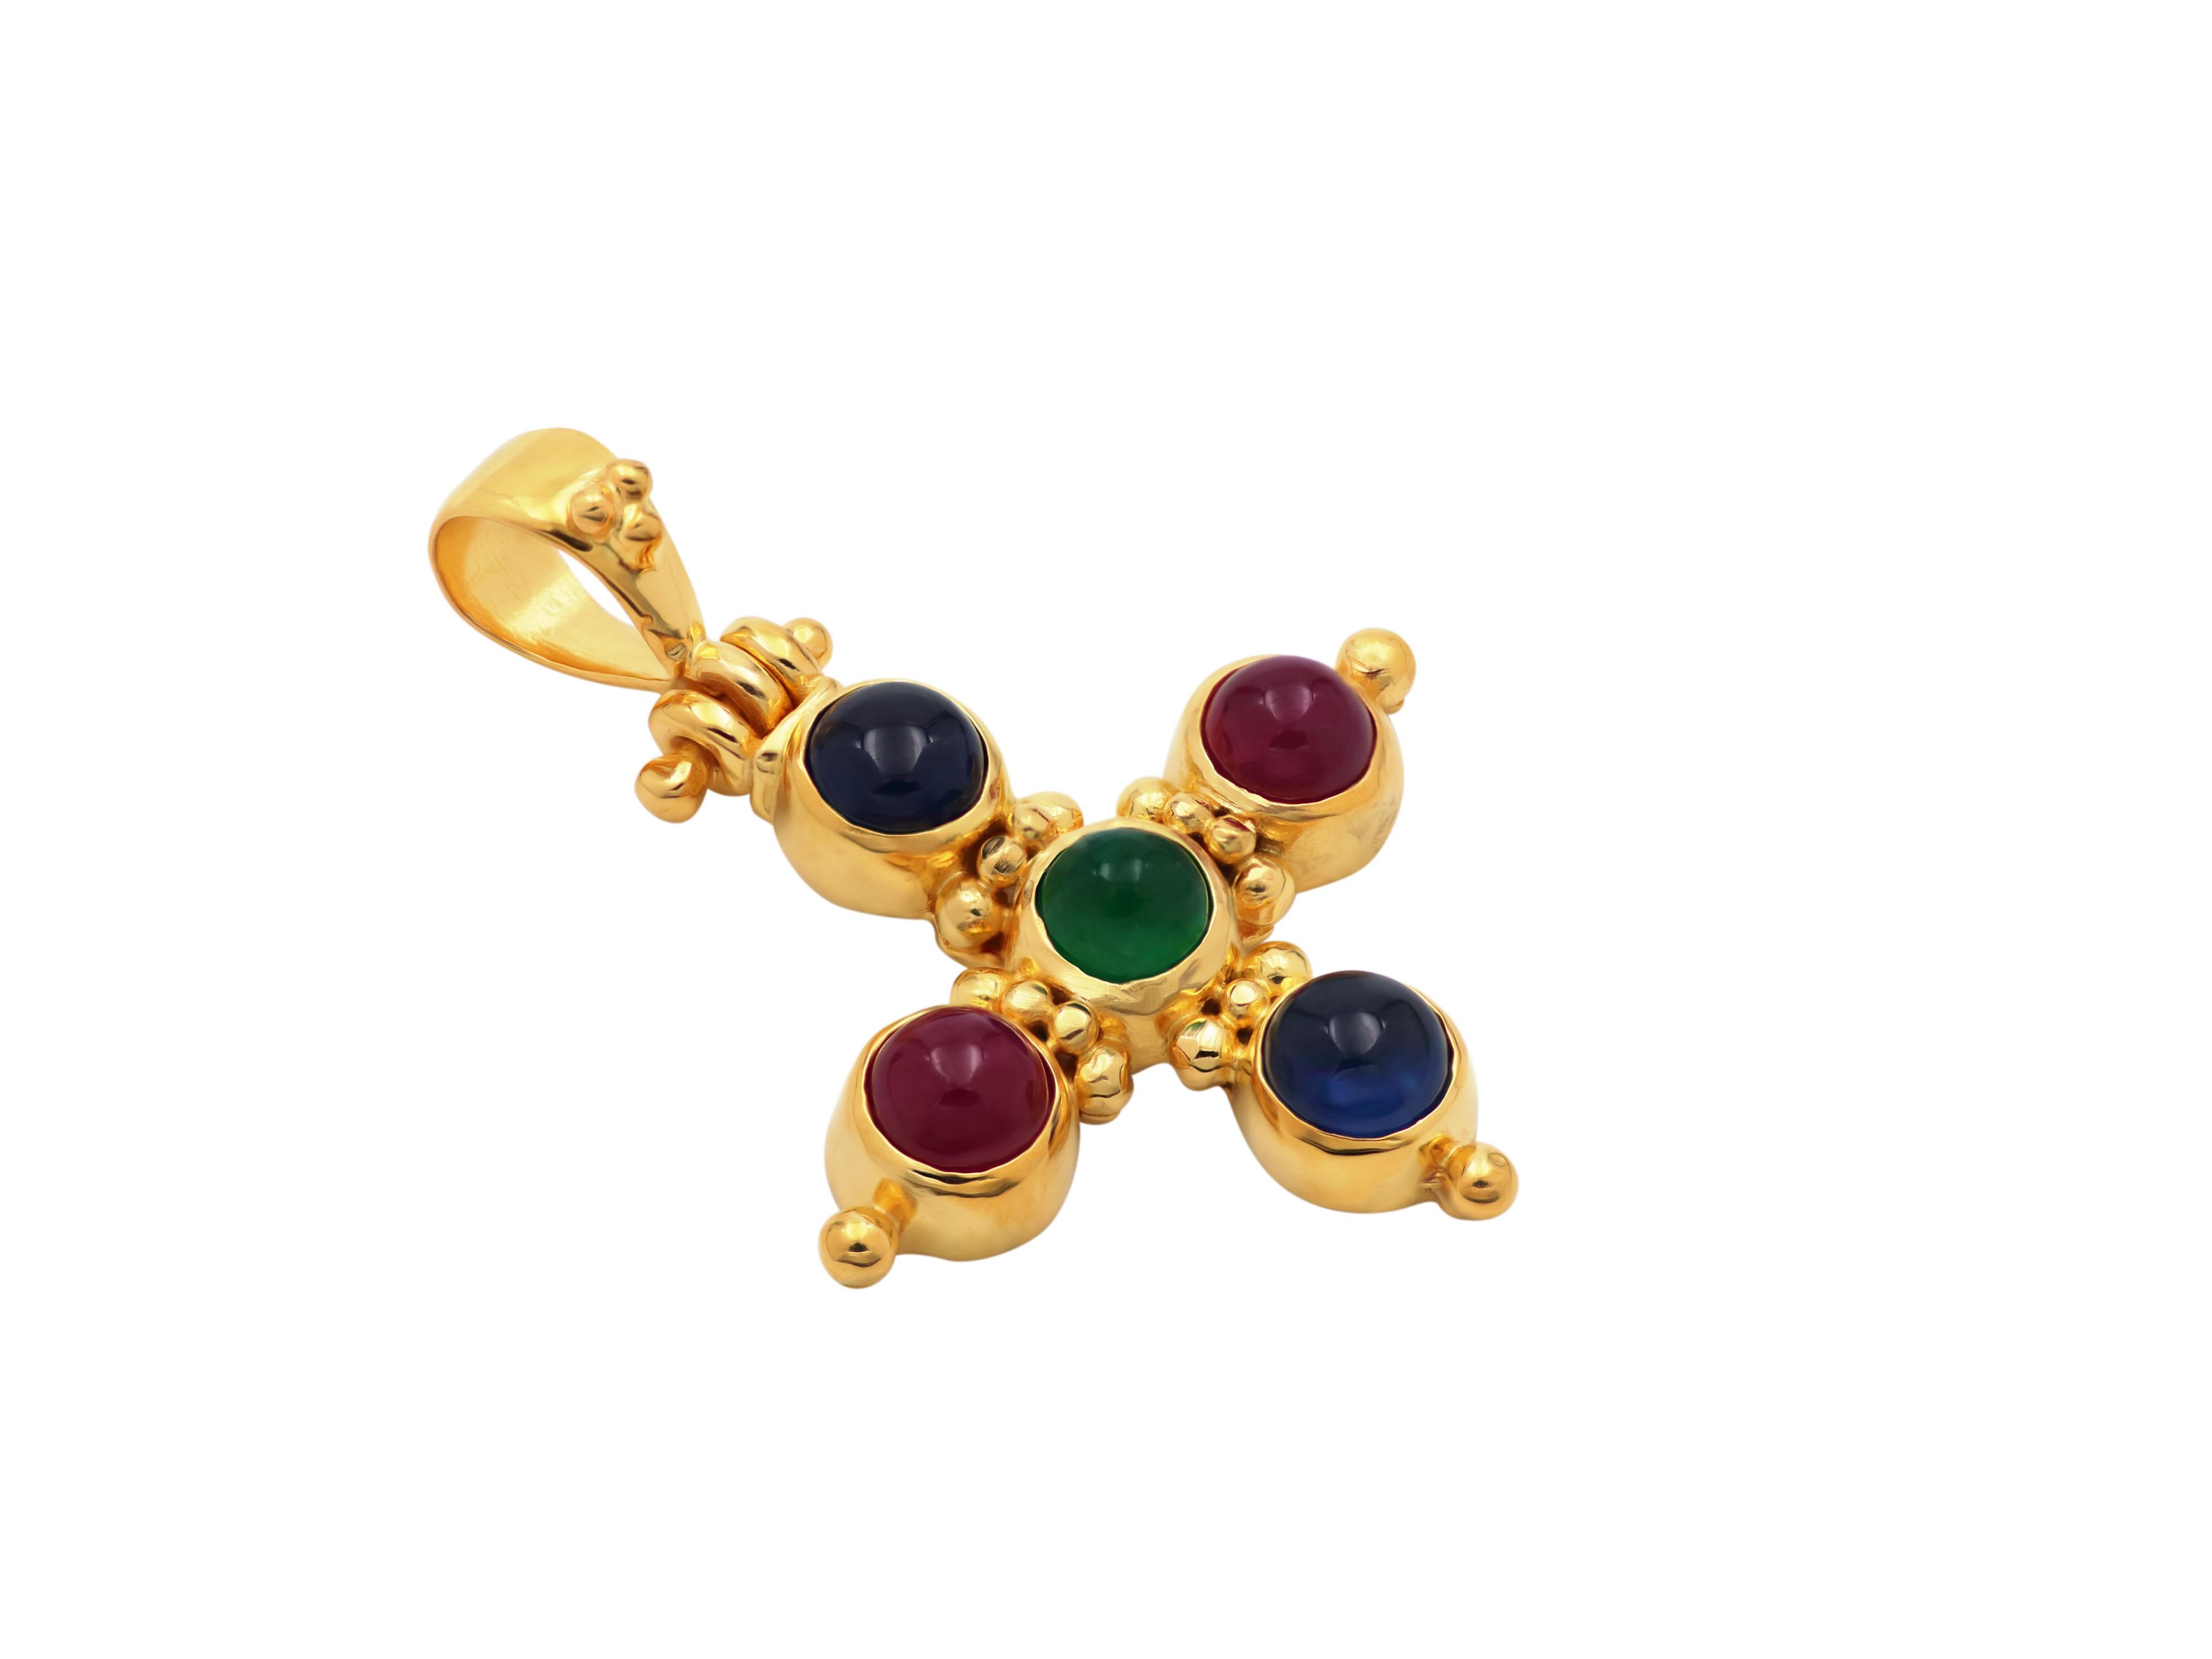 Classic cross completely handmade in the old traditional way in 18 karats gold set with round cut rubies, blue sapphires and emerald, decorated with granulation.